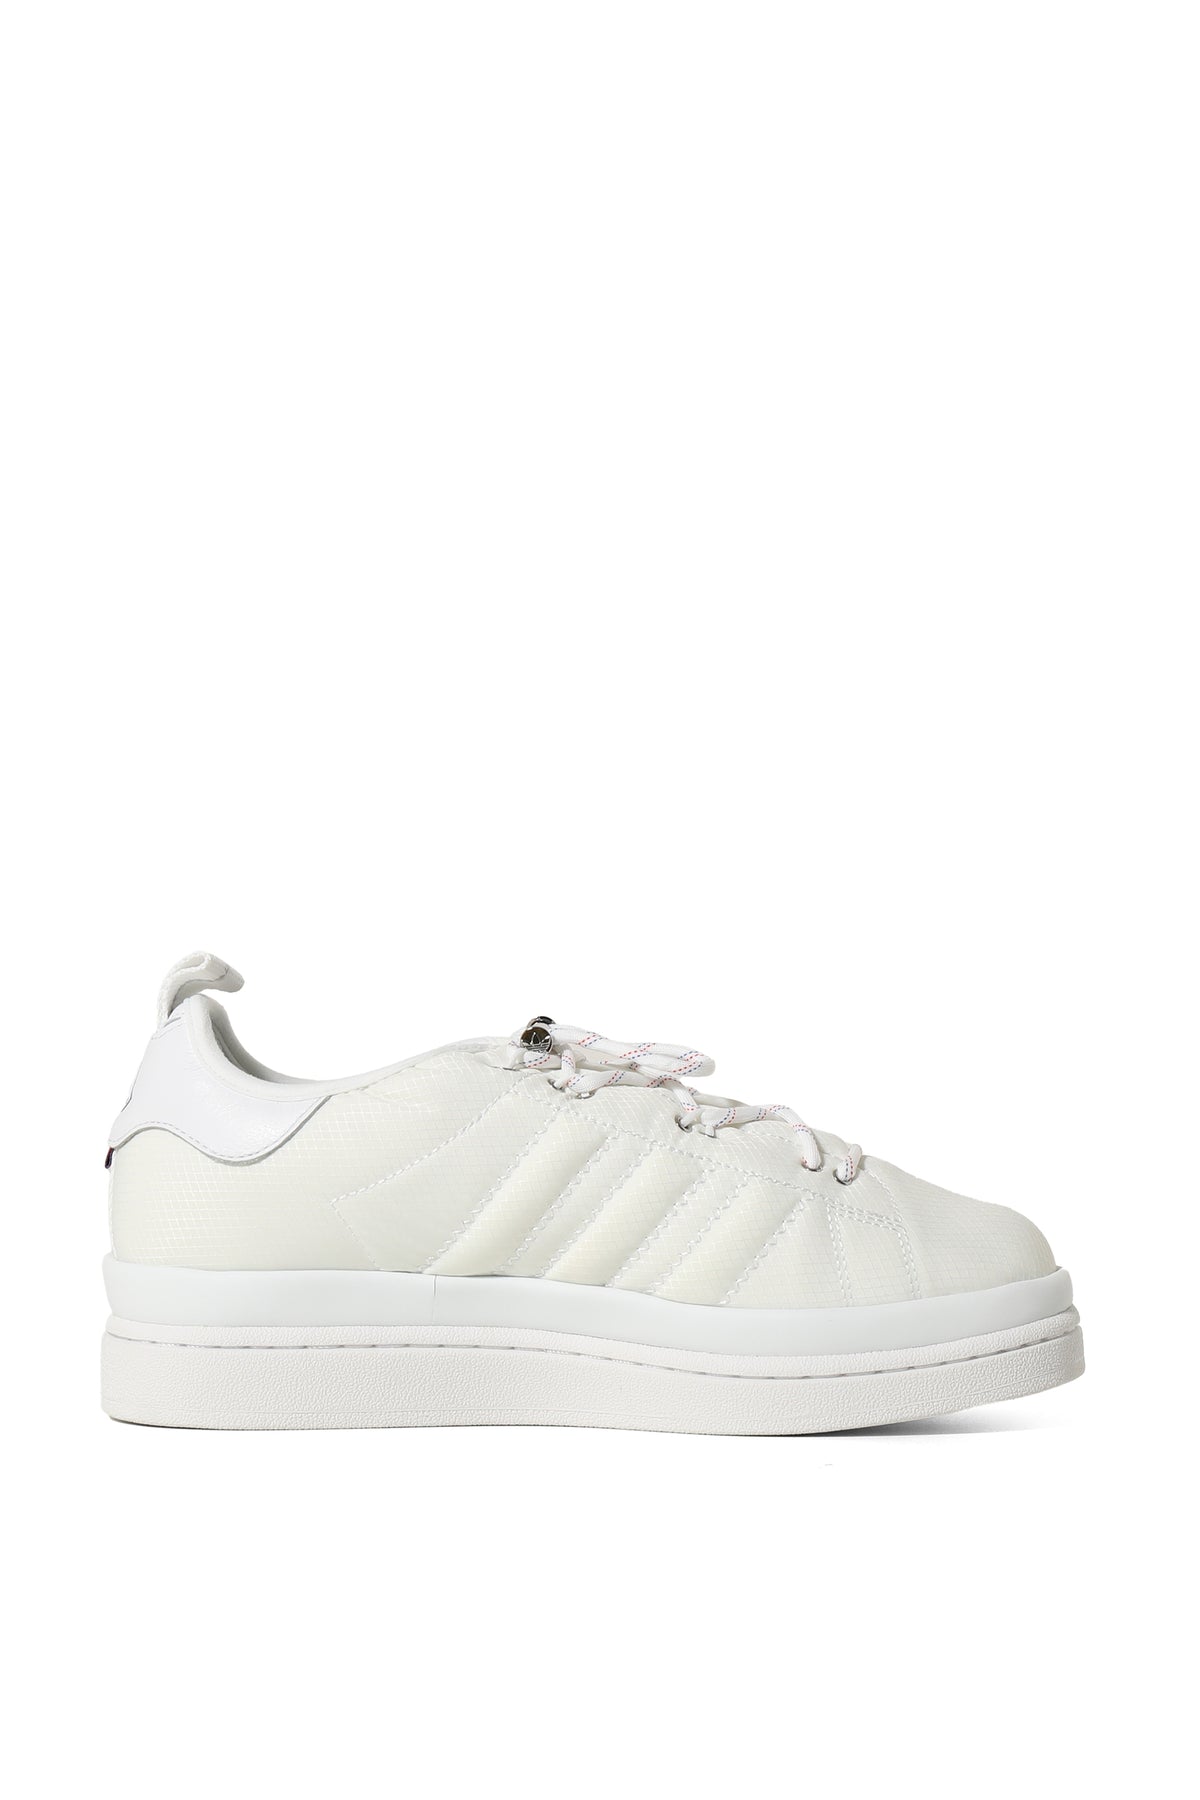 MONCLER CAMPUS LOW TOP SNEAKERS / WHT